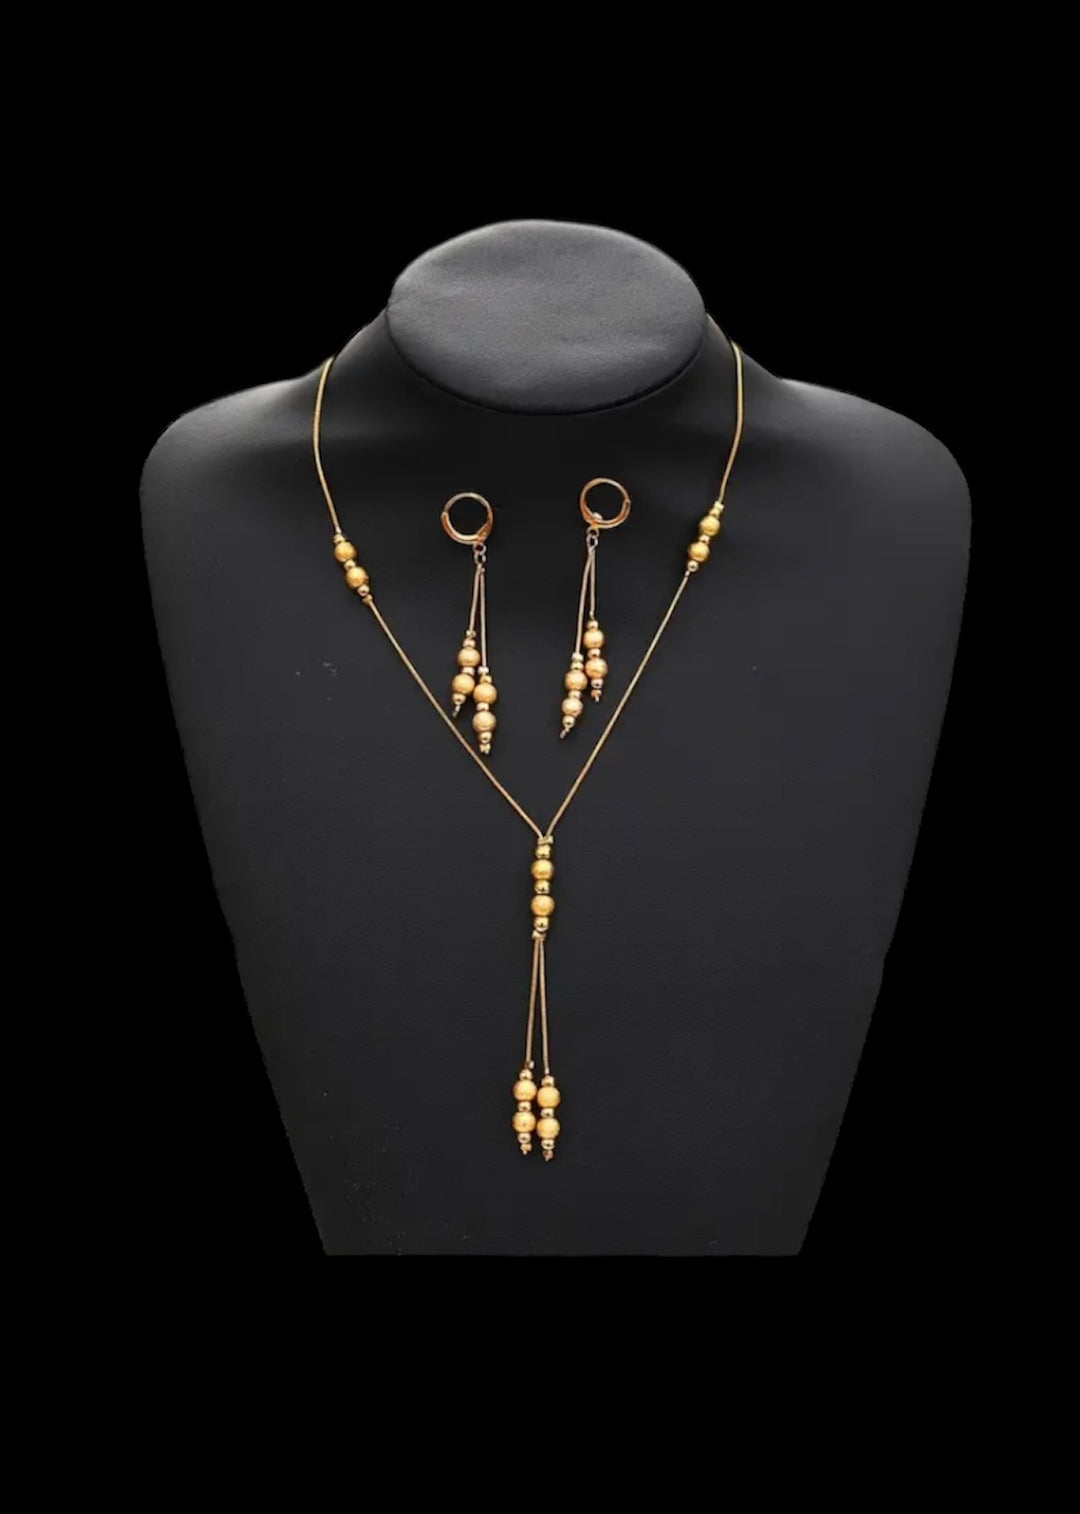 Jewelry Set 24k Gold Plated Made of Spherical Beads